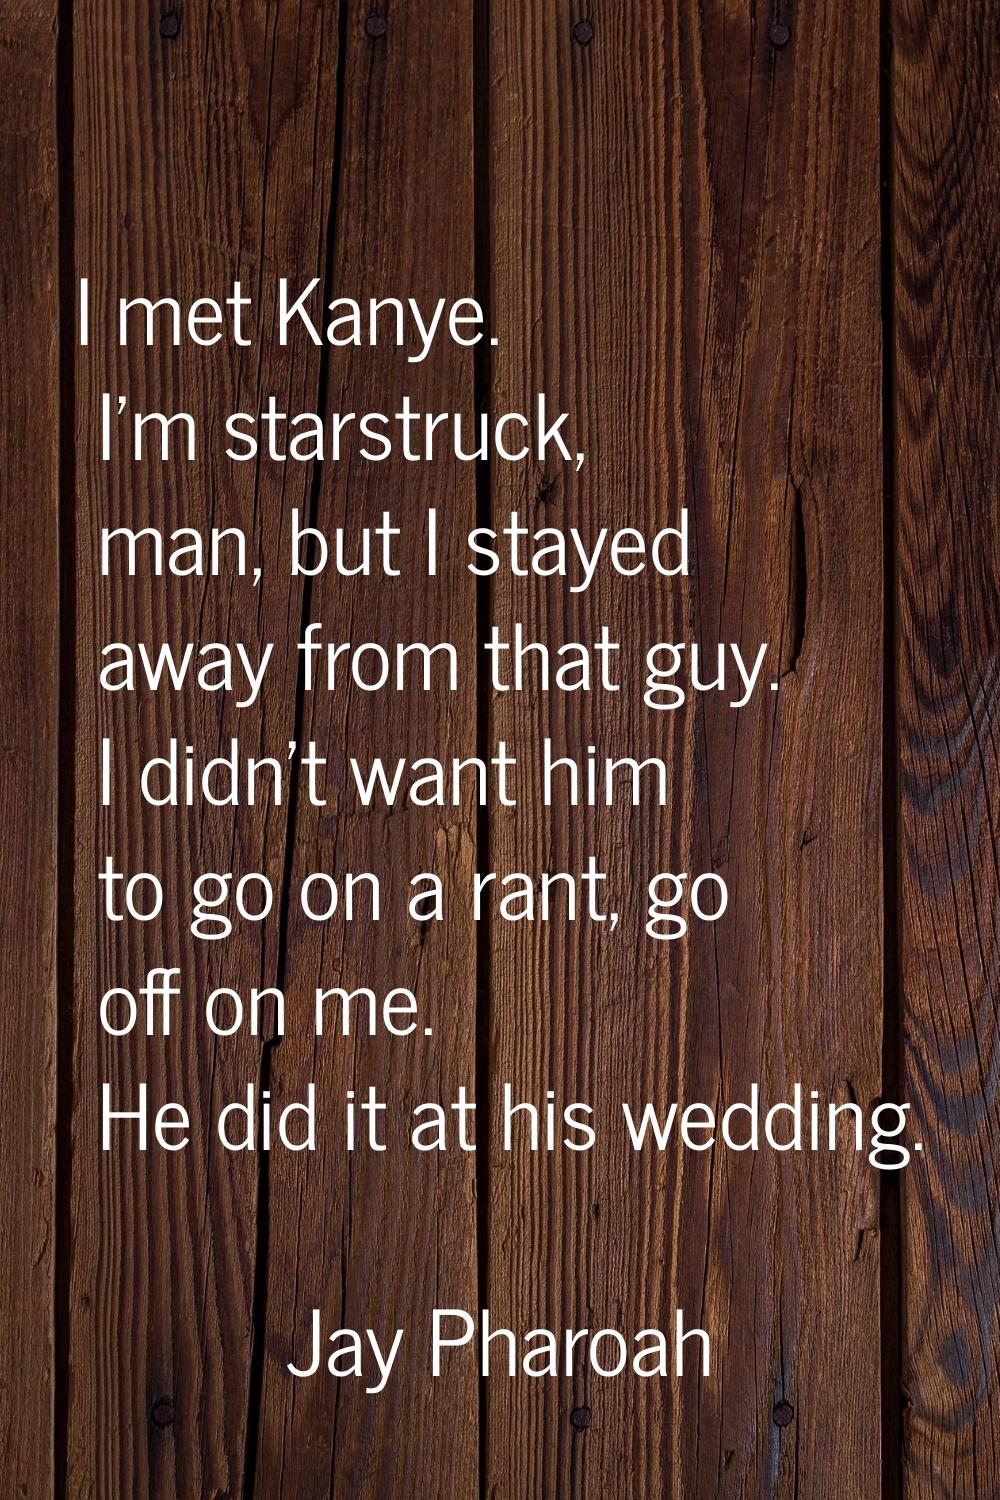 I met Kanye. I'm starstruck, man, but I stayed away from that guy. I didn't want him to go on a ran